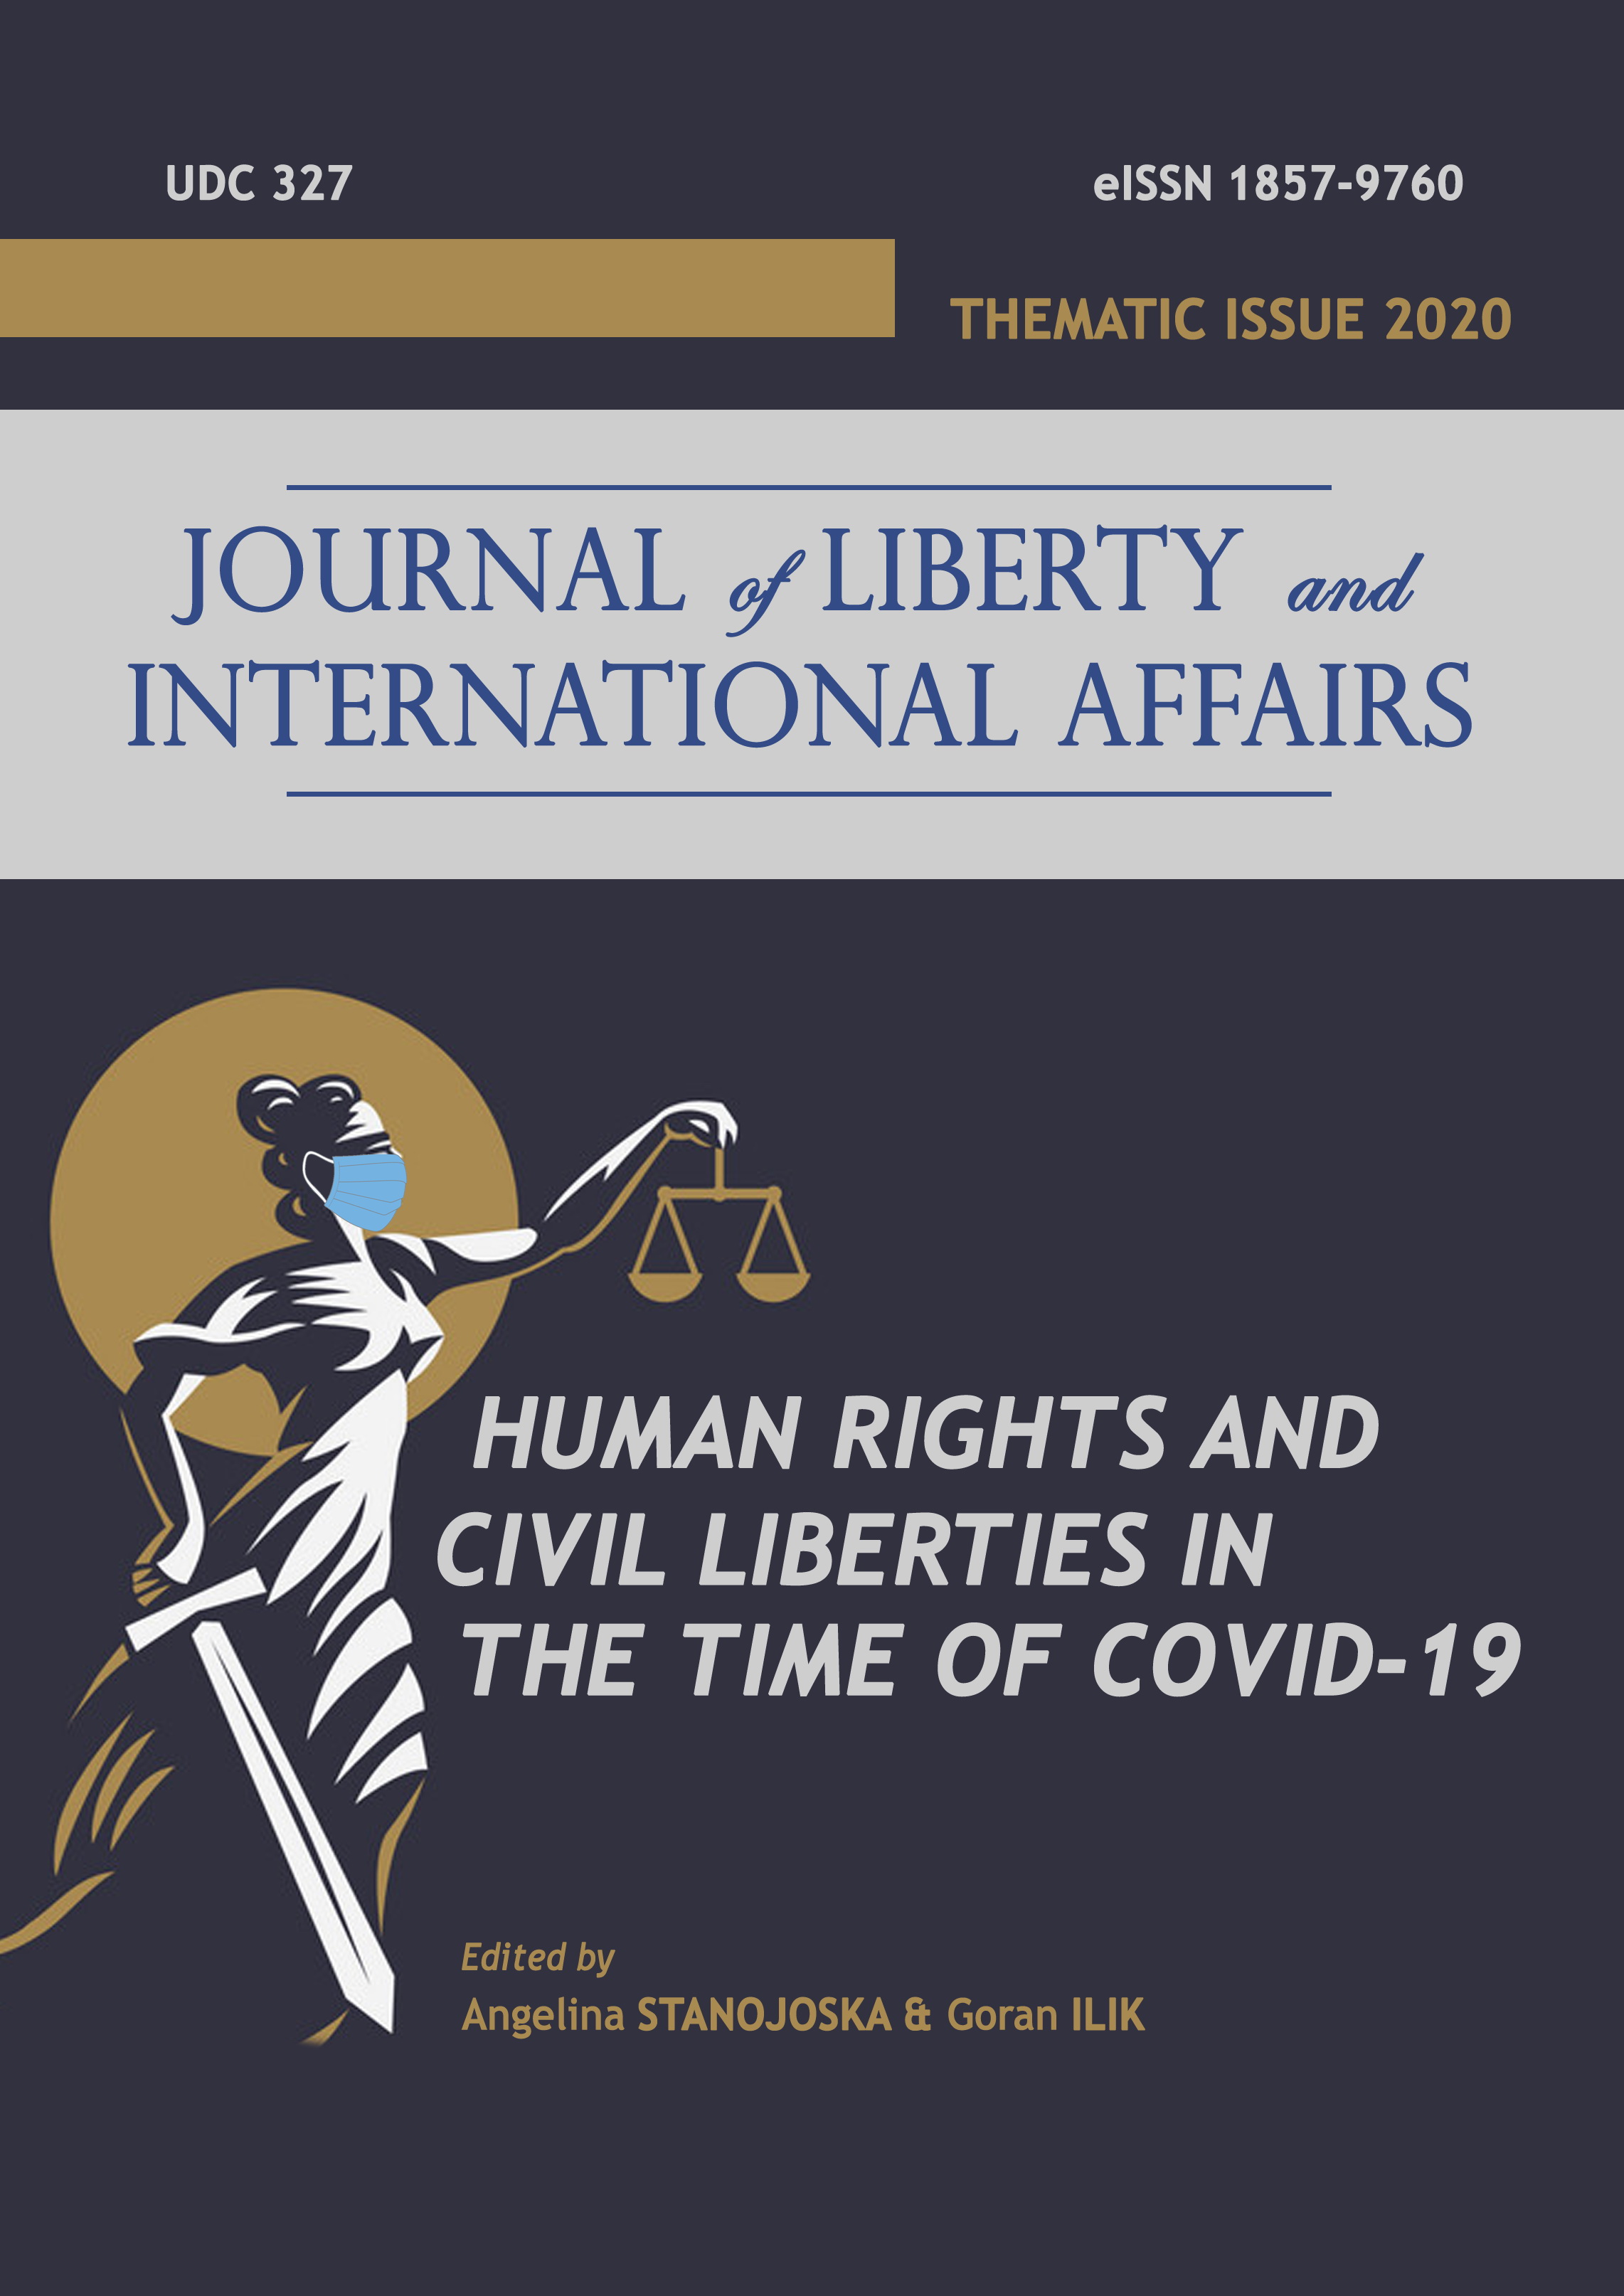 FREEDOM OF EXPRESSION IN TIMES OF COVID-19: CHILLING EFFECT IN HUNGARY AND SERBIA